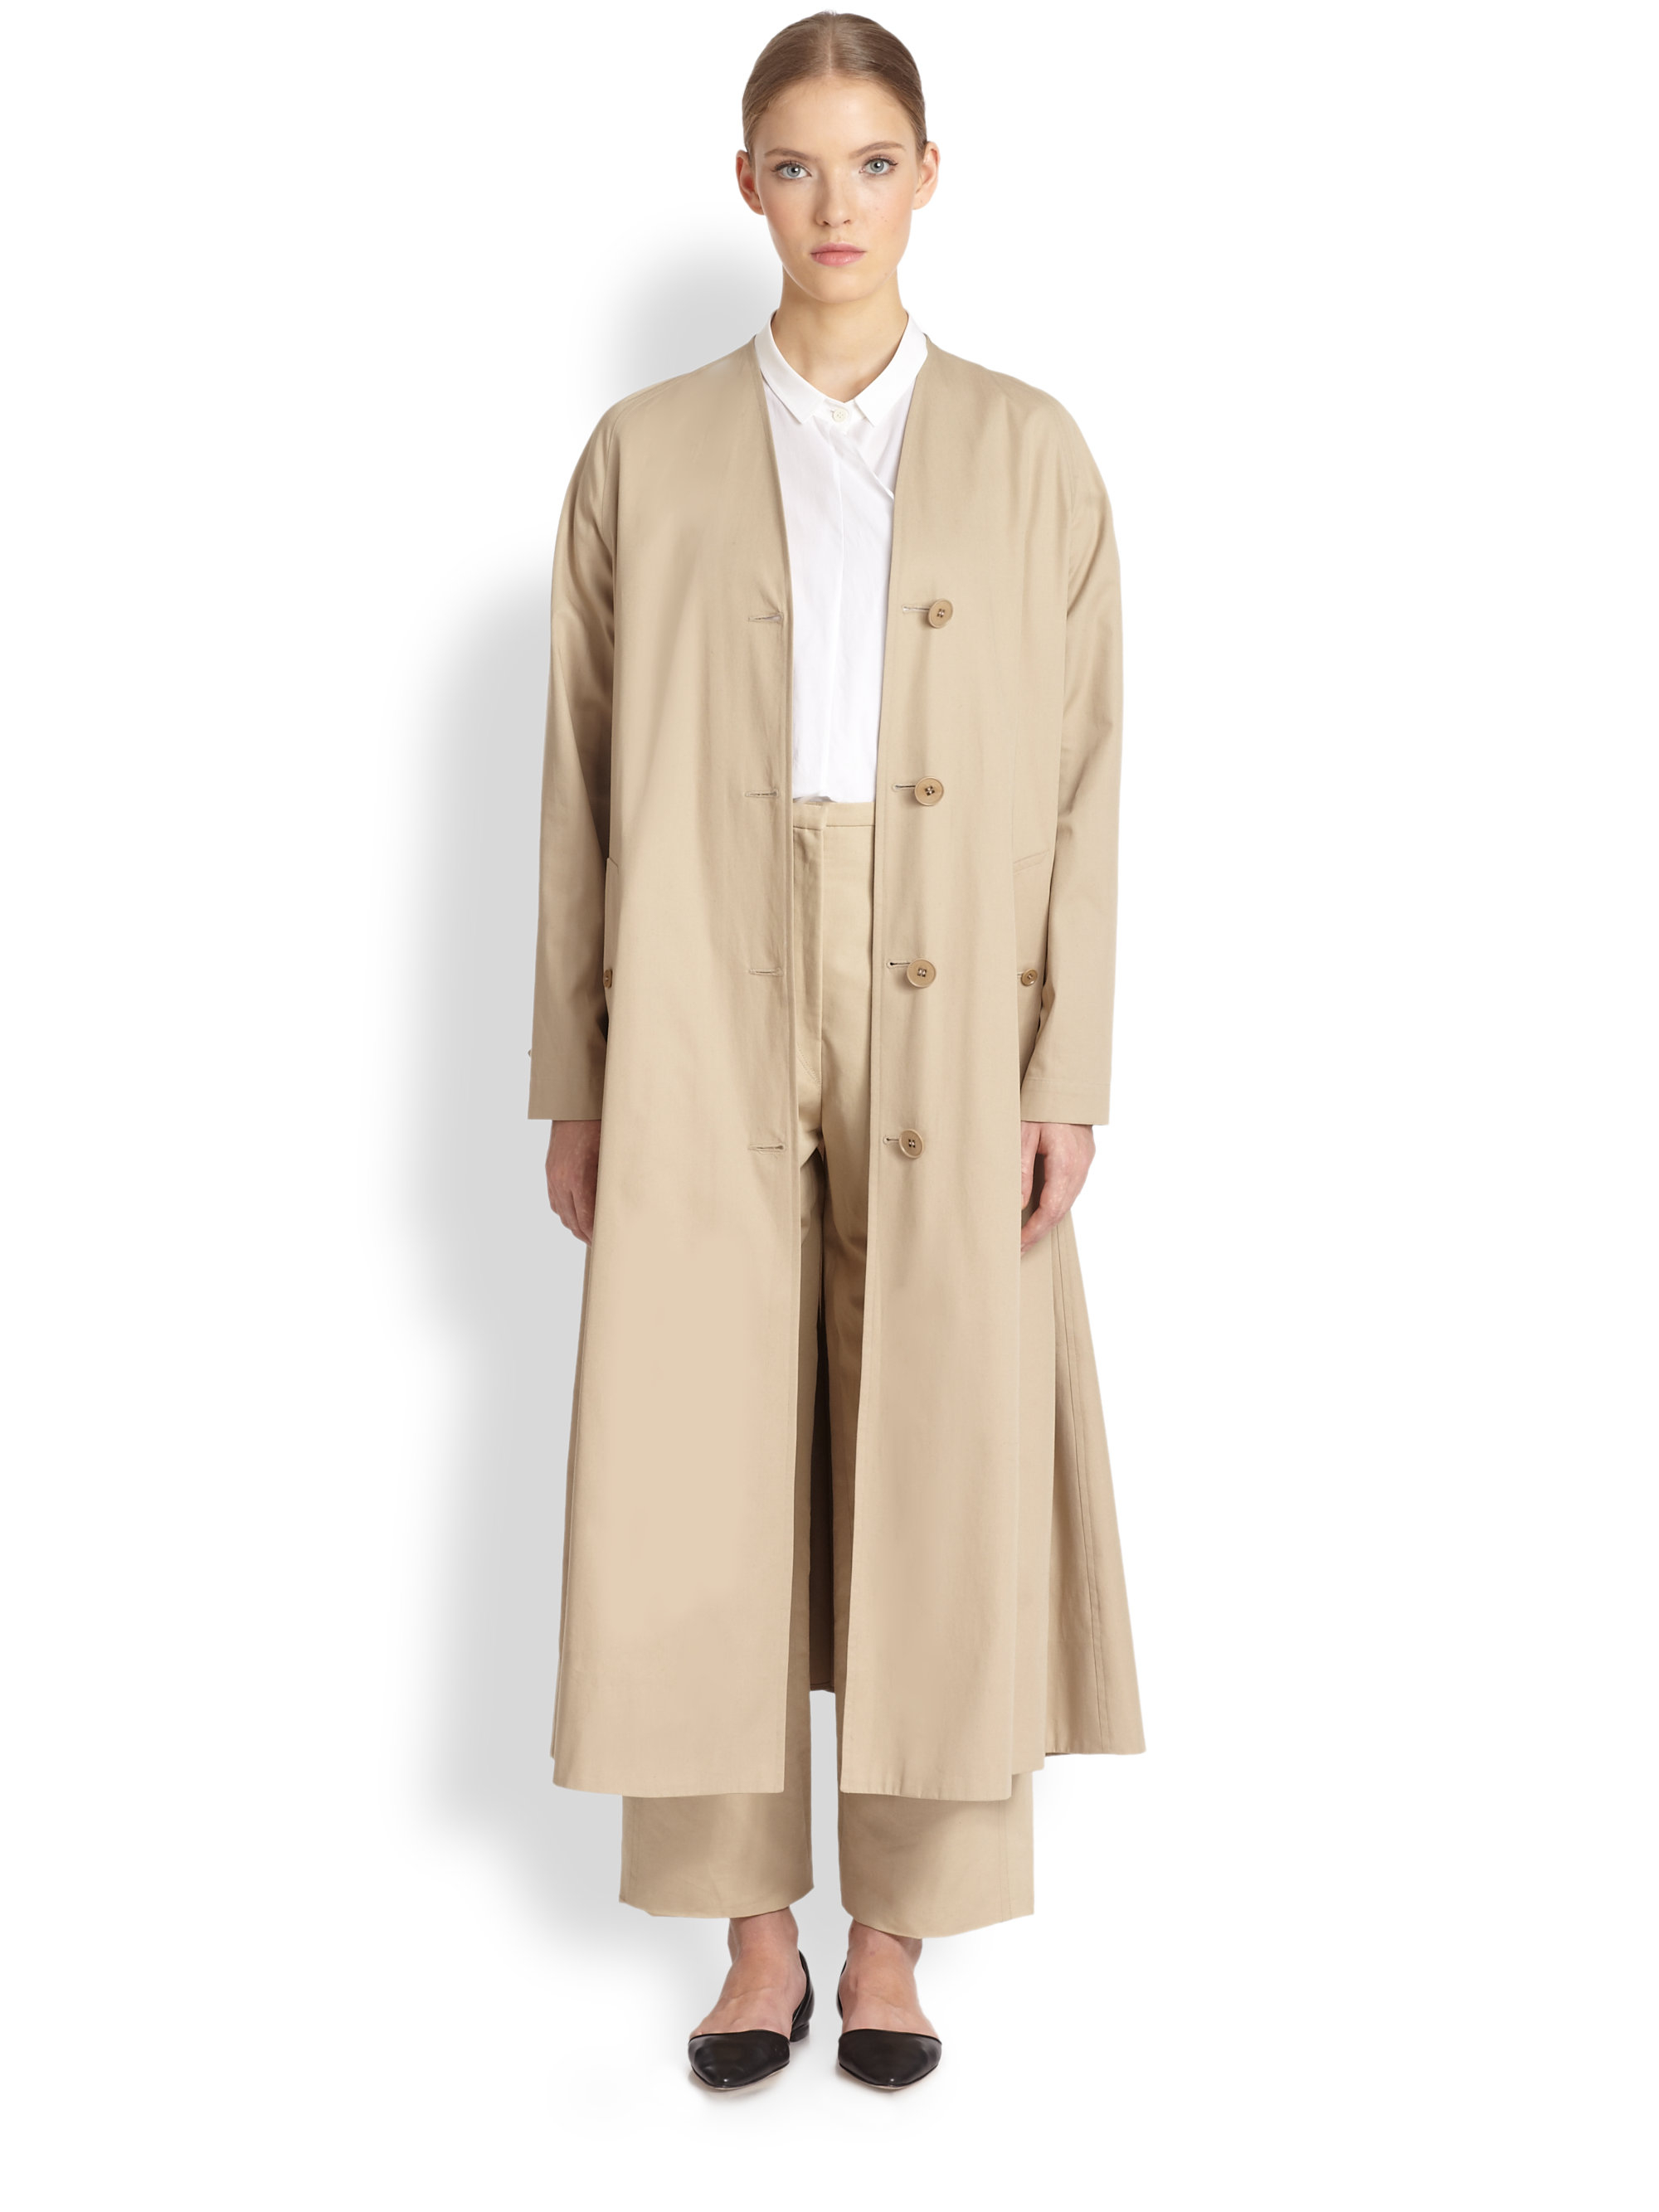 Lyst - Christophe Lemaire Cotton Twill Coat in Natural